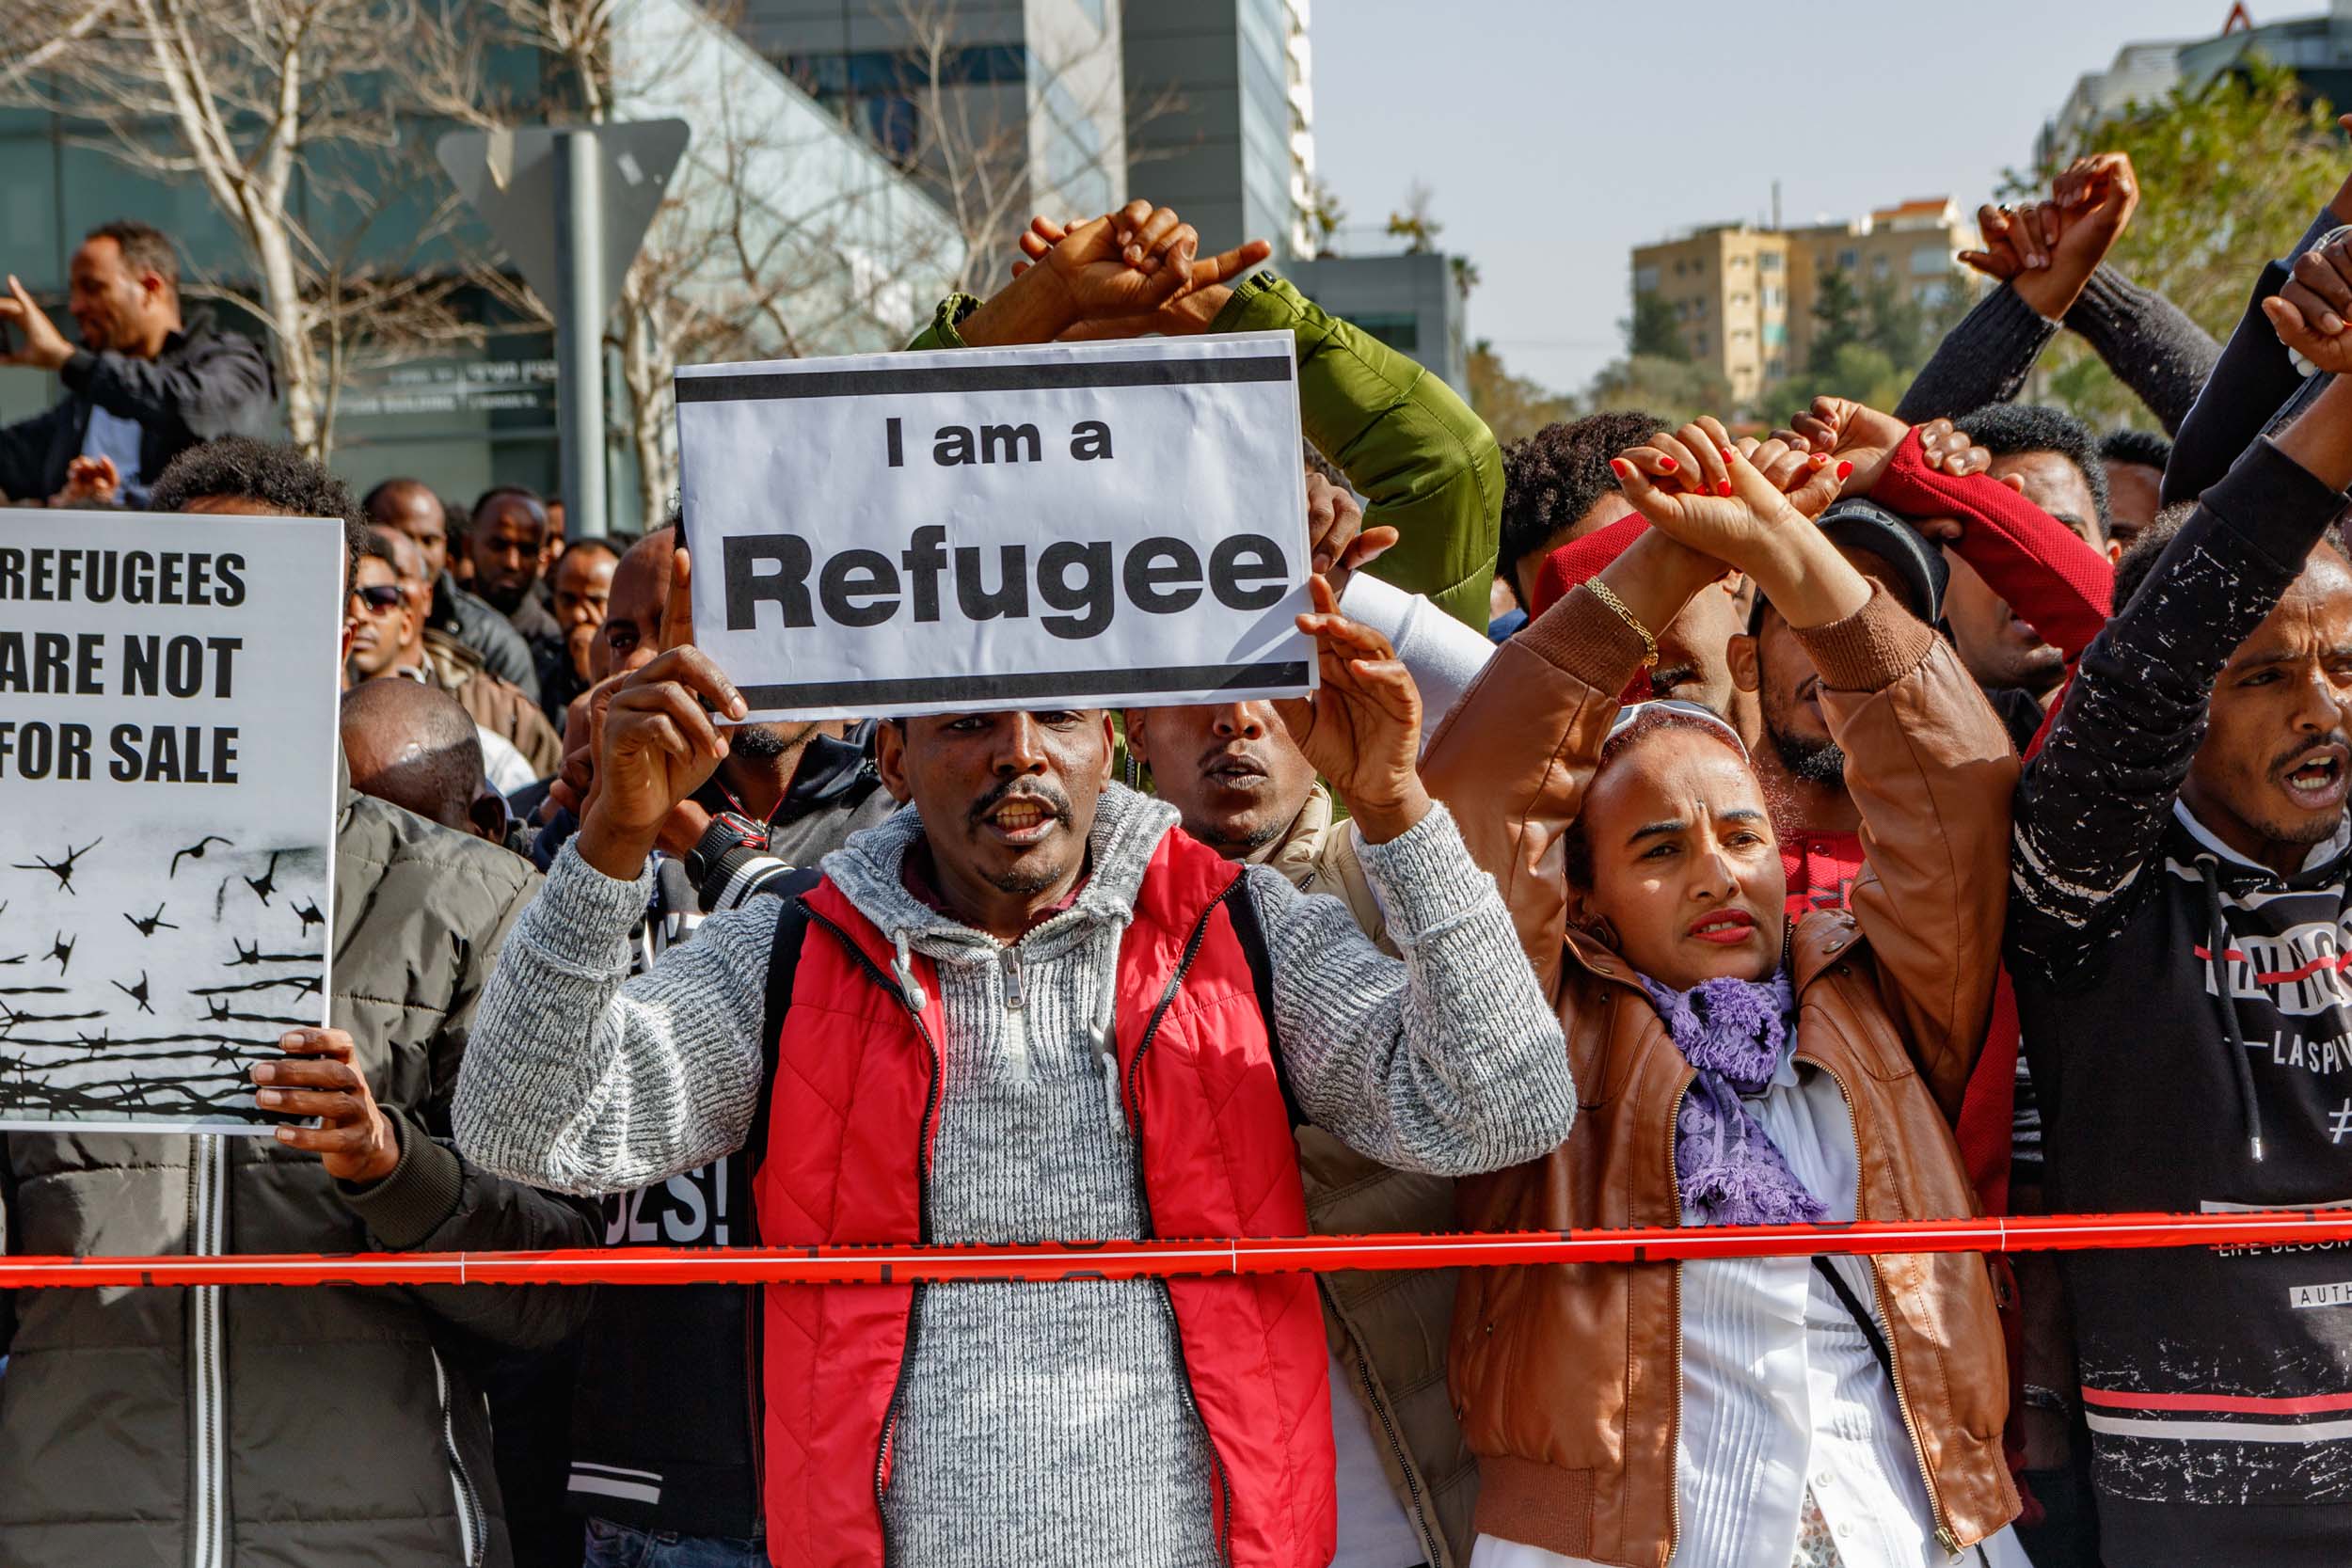 Israel, January 2018 - Illegal immigrants and asylum seekers from Africa protest the decision to expel them back